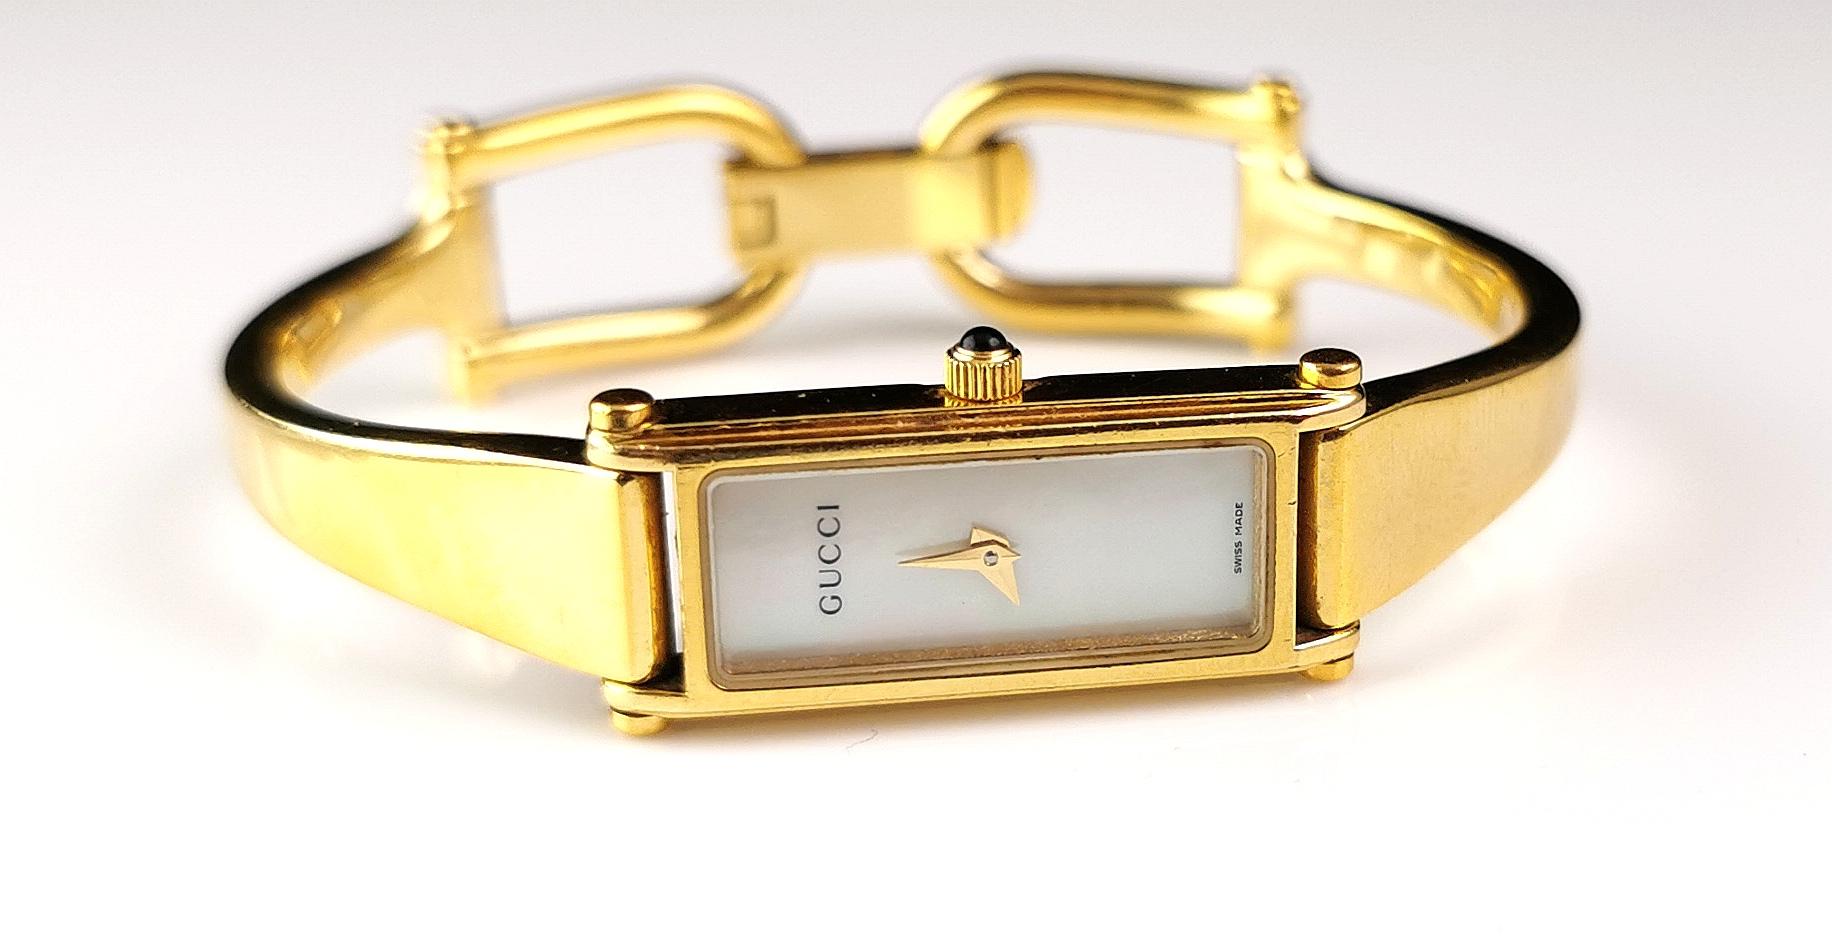 A stylish Gucci 1500l stainless steel watch.

This is a bracelet or bangle strap watch with a nice sleek gold plated bangle strap with the signature Gucci horsebit clasp.

The case is gold plated with an off white dial, no numerals and Gucci logo,